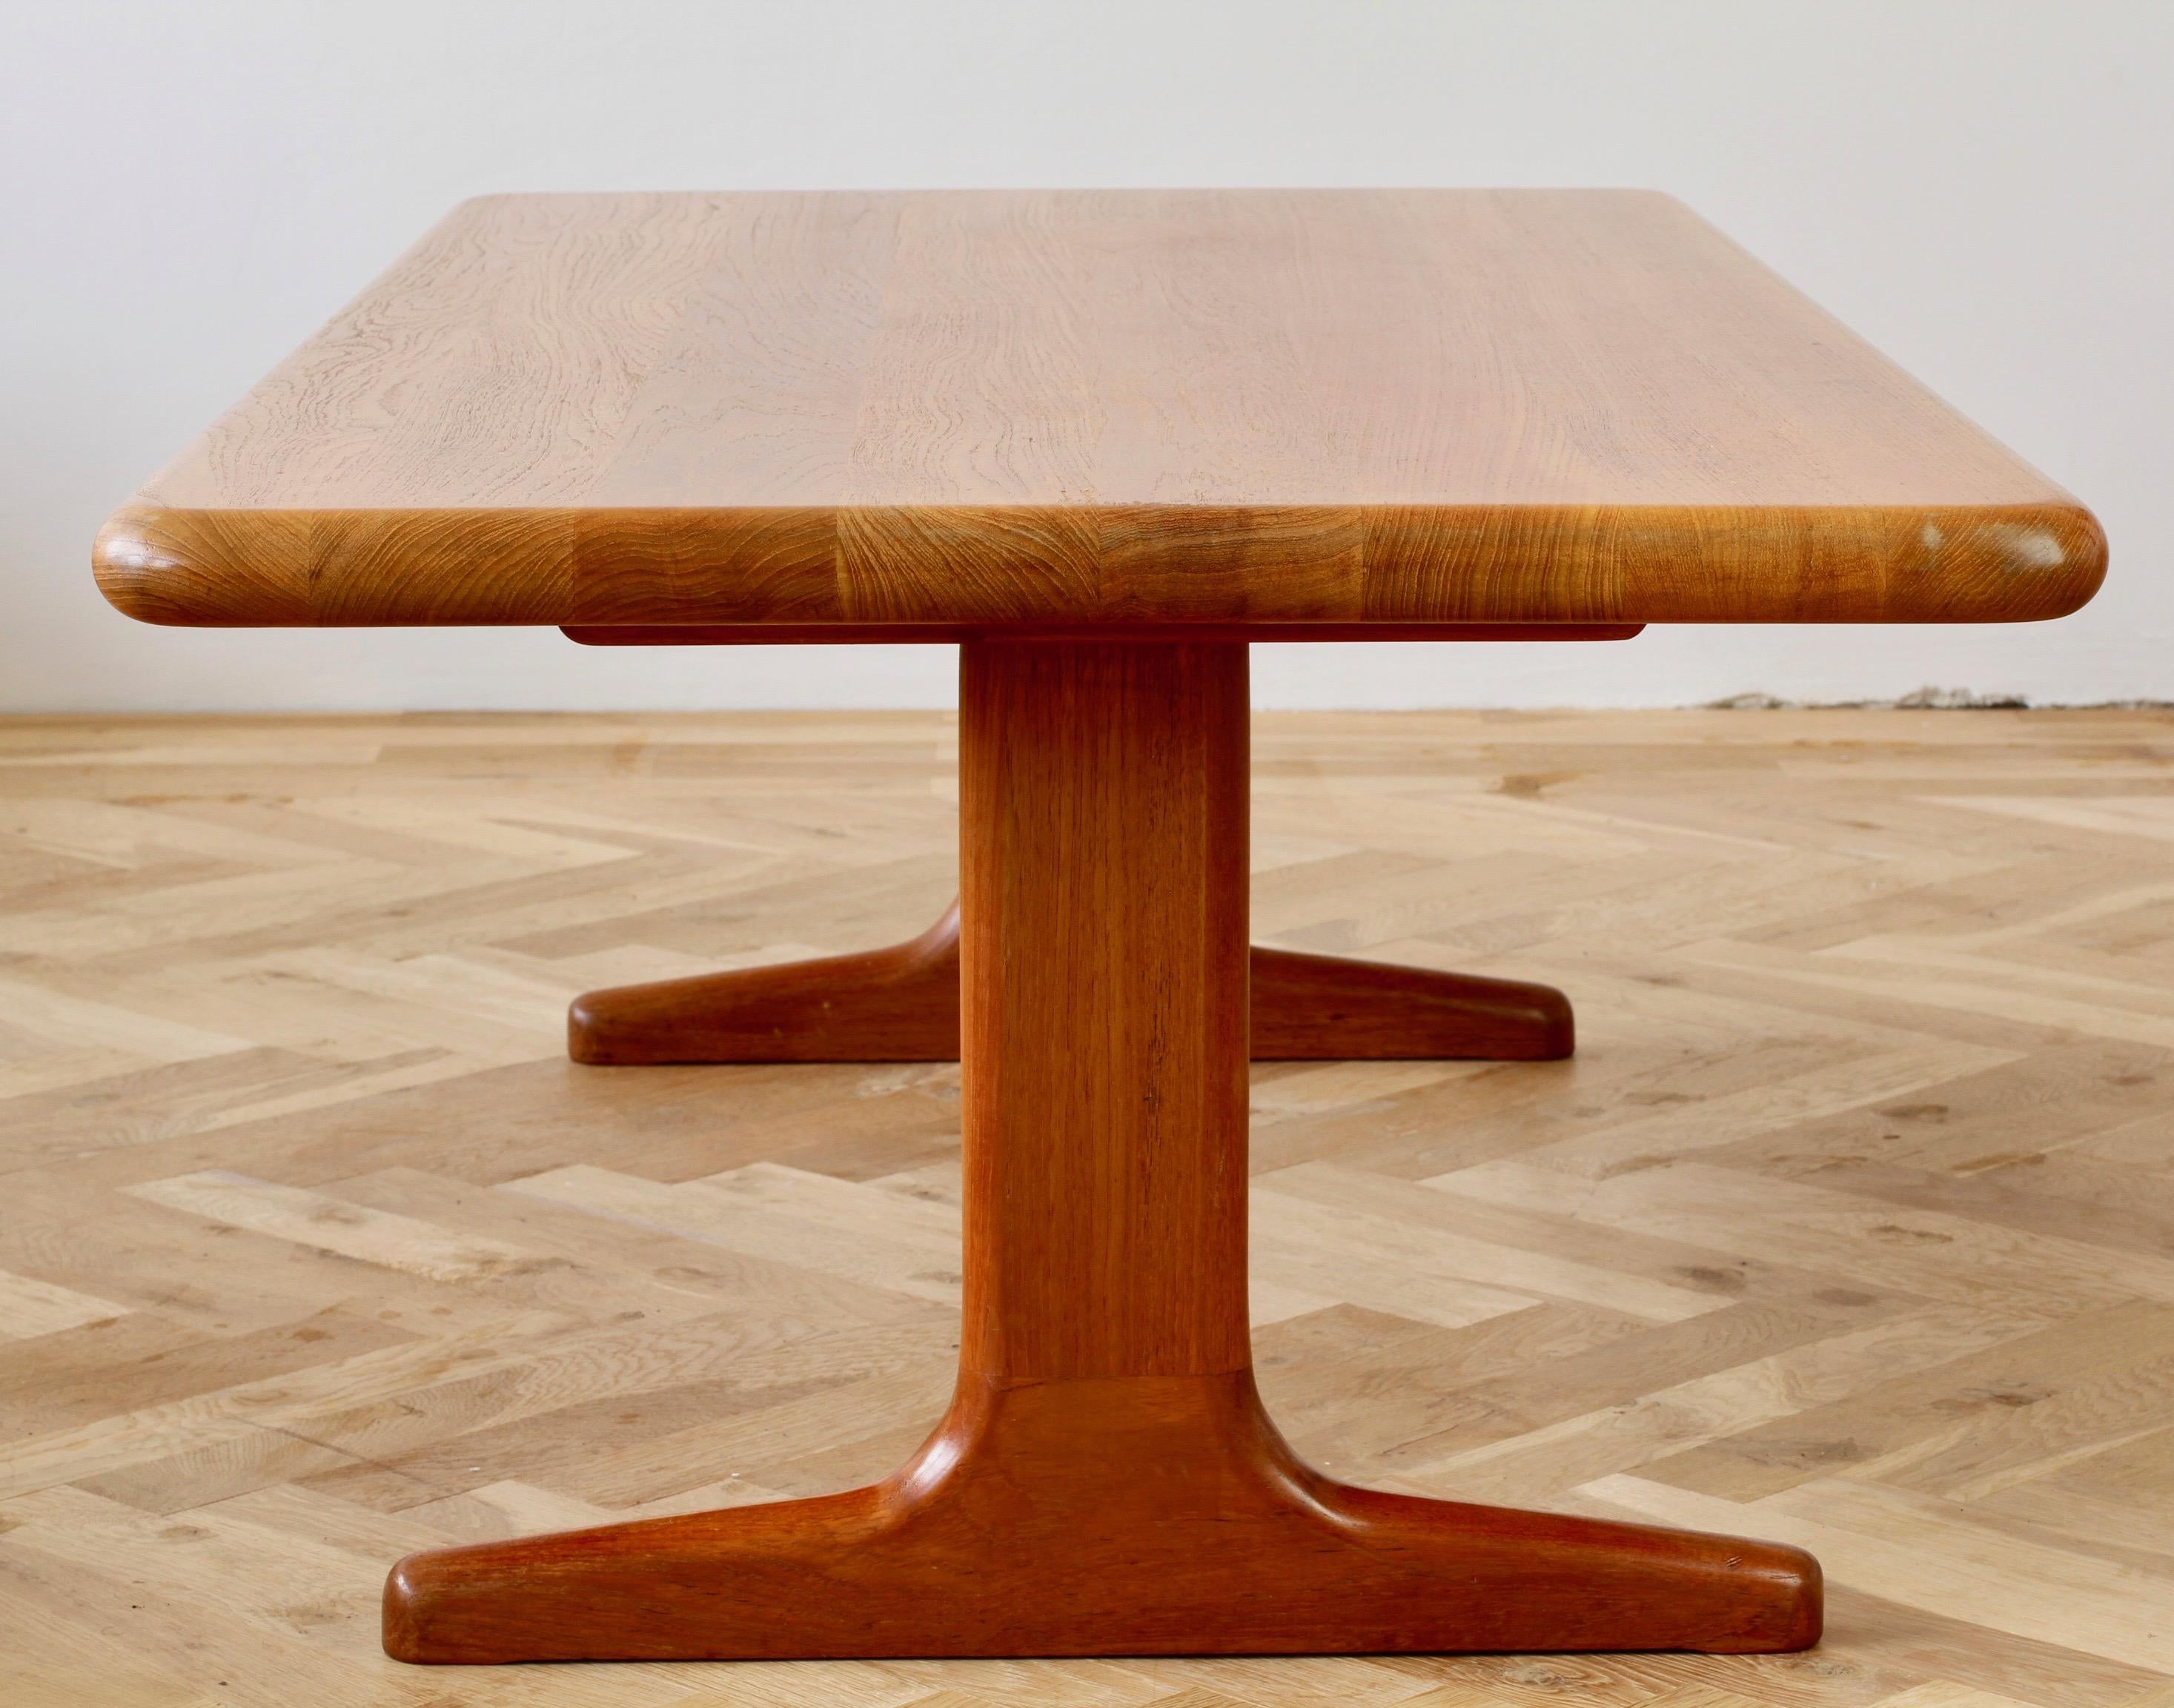 Lacquered Mid-Century Modern Danish Large Teak Coffee Center Table, Glostrup Denmark 1960s For Sale